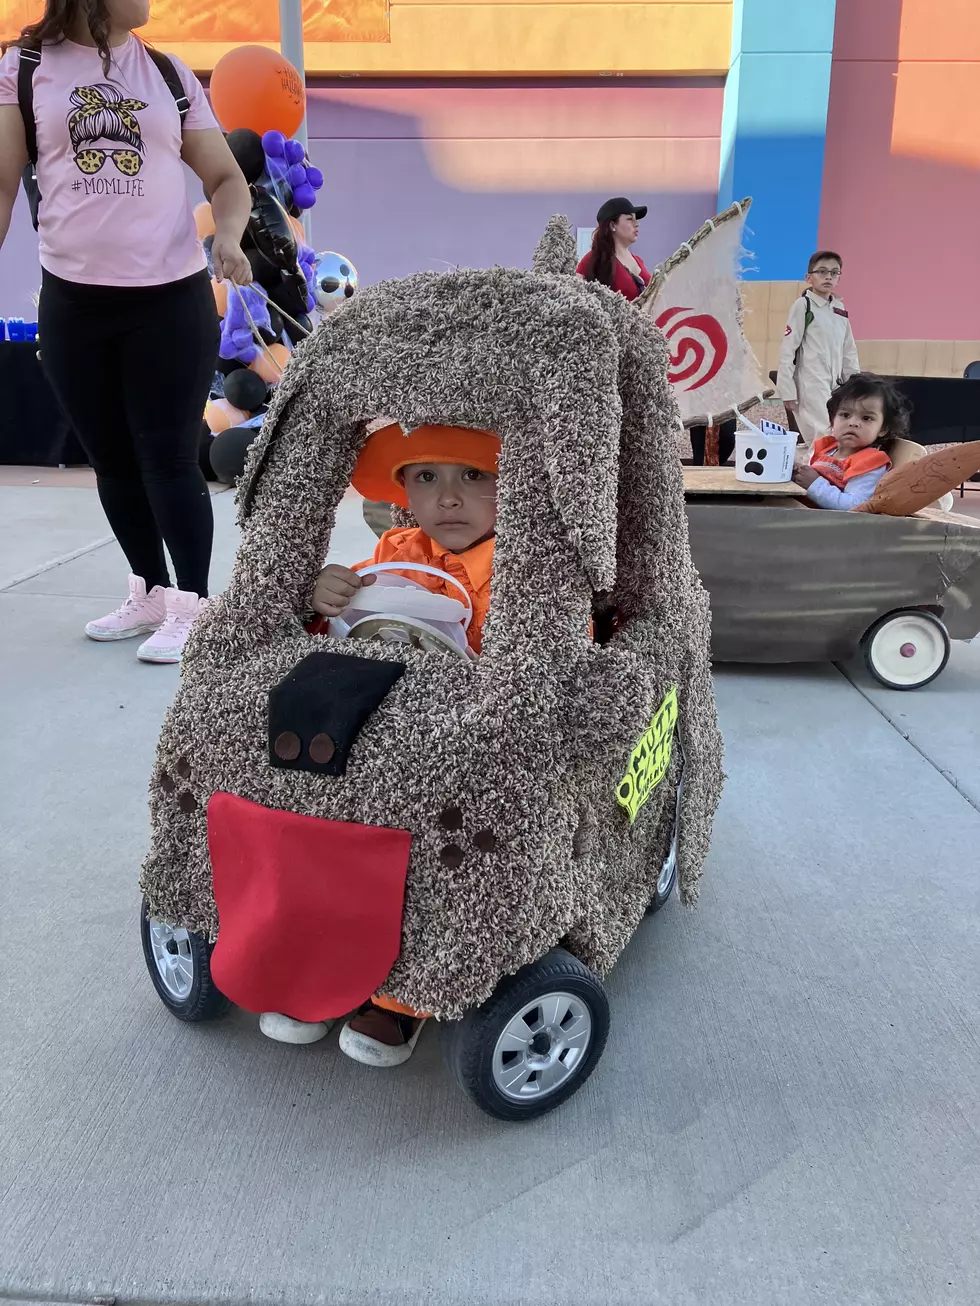 A Smart Way to Convert Your Kid’s Car Into a Dumb and Dumber Costume